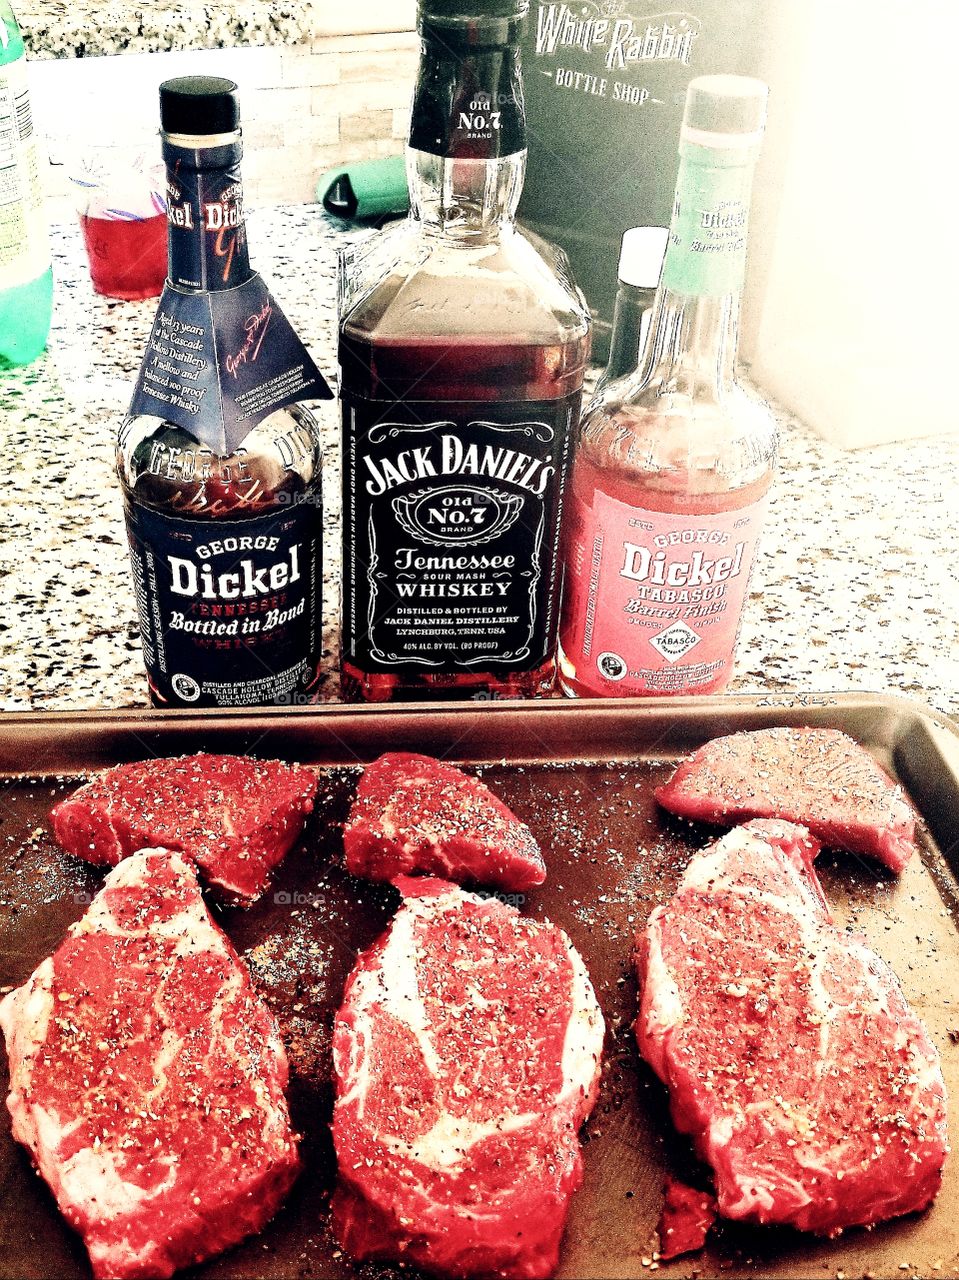 Taste of the best flavors of Tennessee with tender red thick cut rib eyes perfectly marbeled &seasoned, ready for the sear of the grill, complete with the liquid treasure of sipping whiskeys of Jack Daniel's & George Dickel.